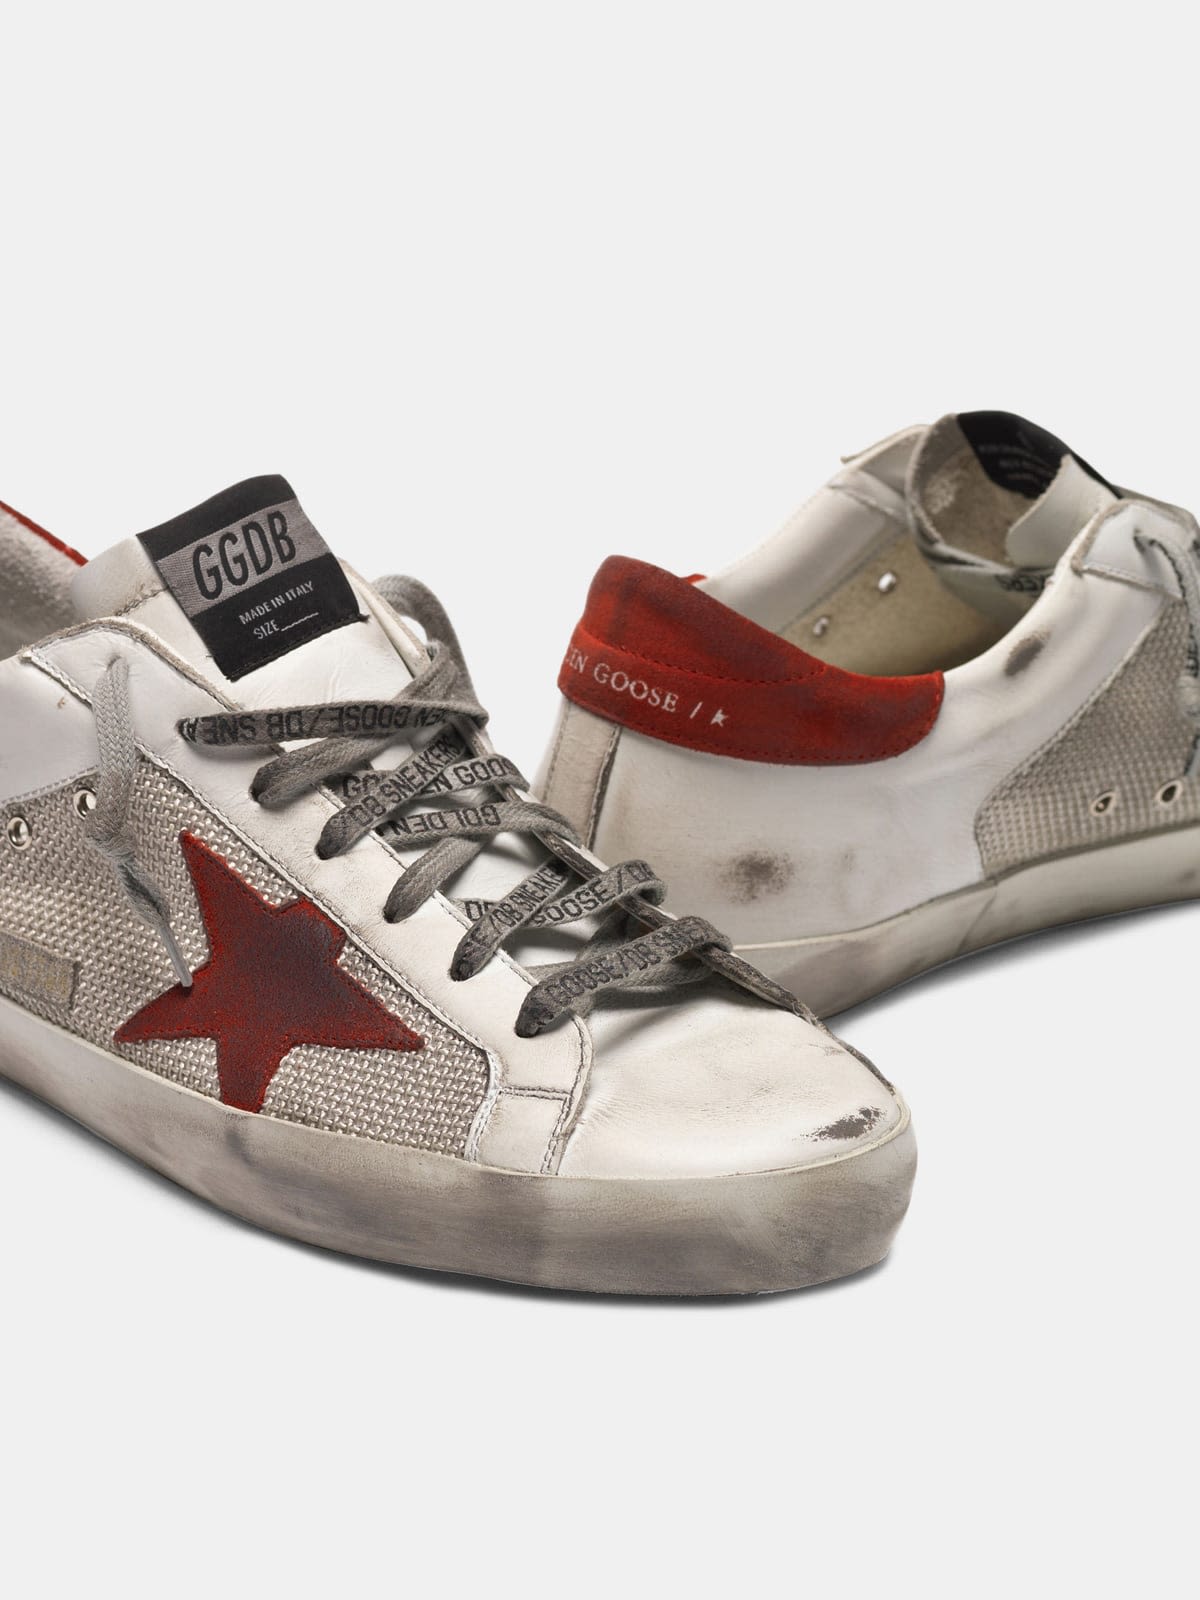 White Superstar sneakers in leather with red star